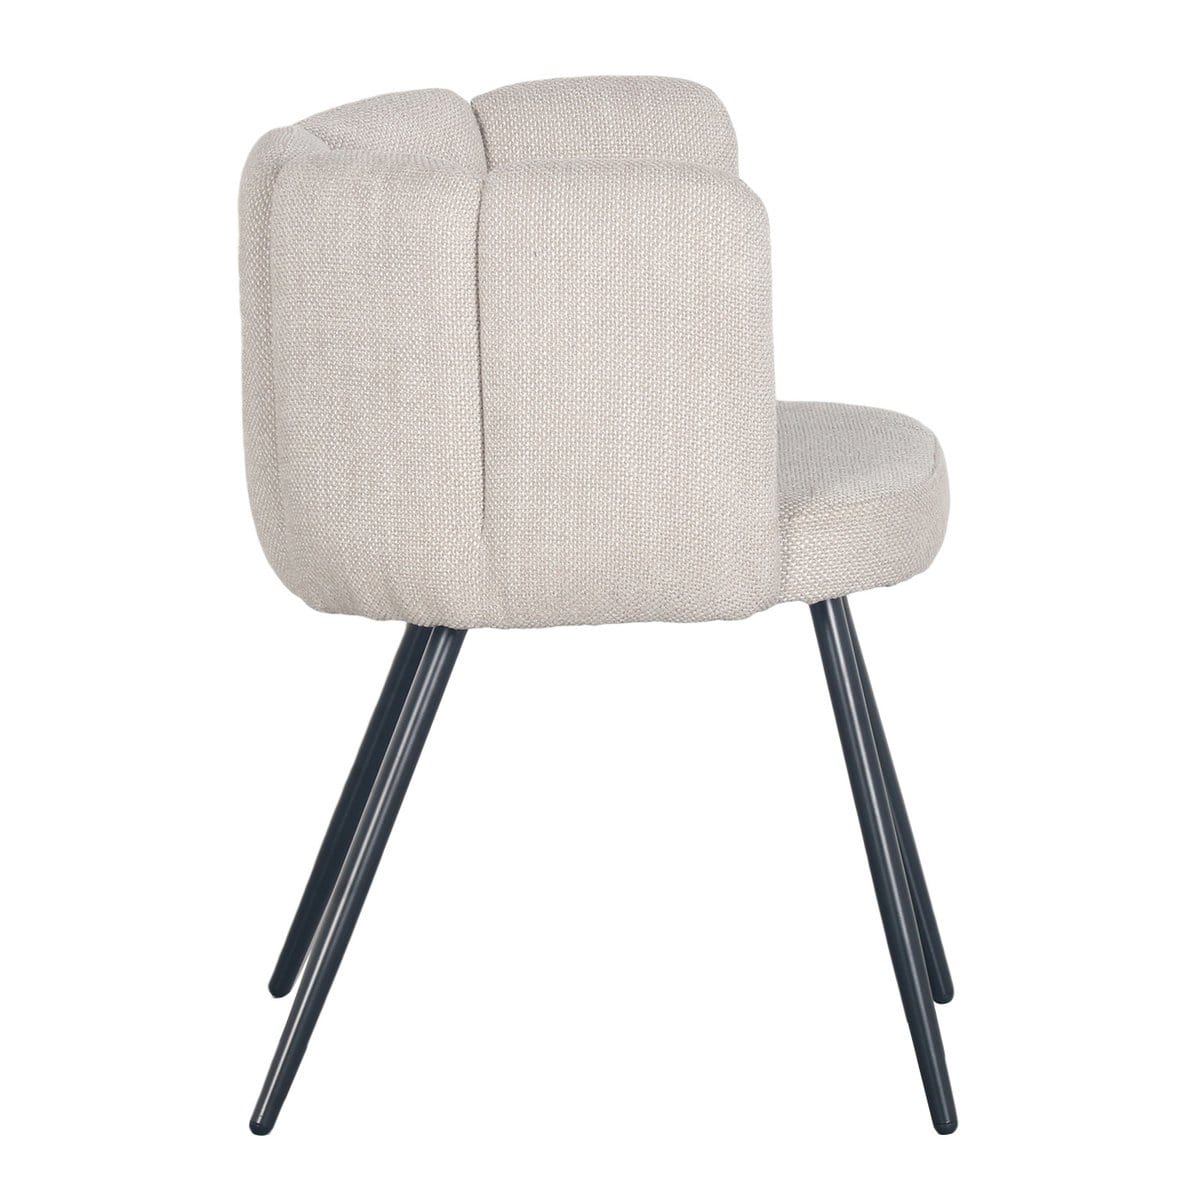 Pole To Pole High five chair beige (Set of 2)